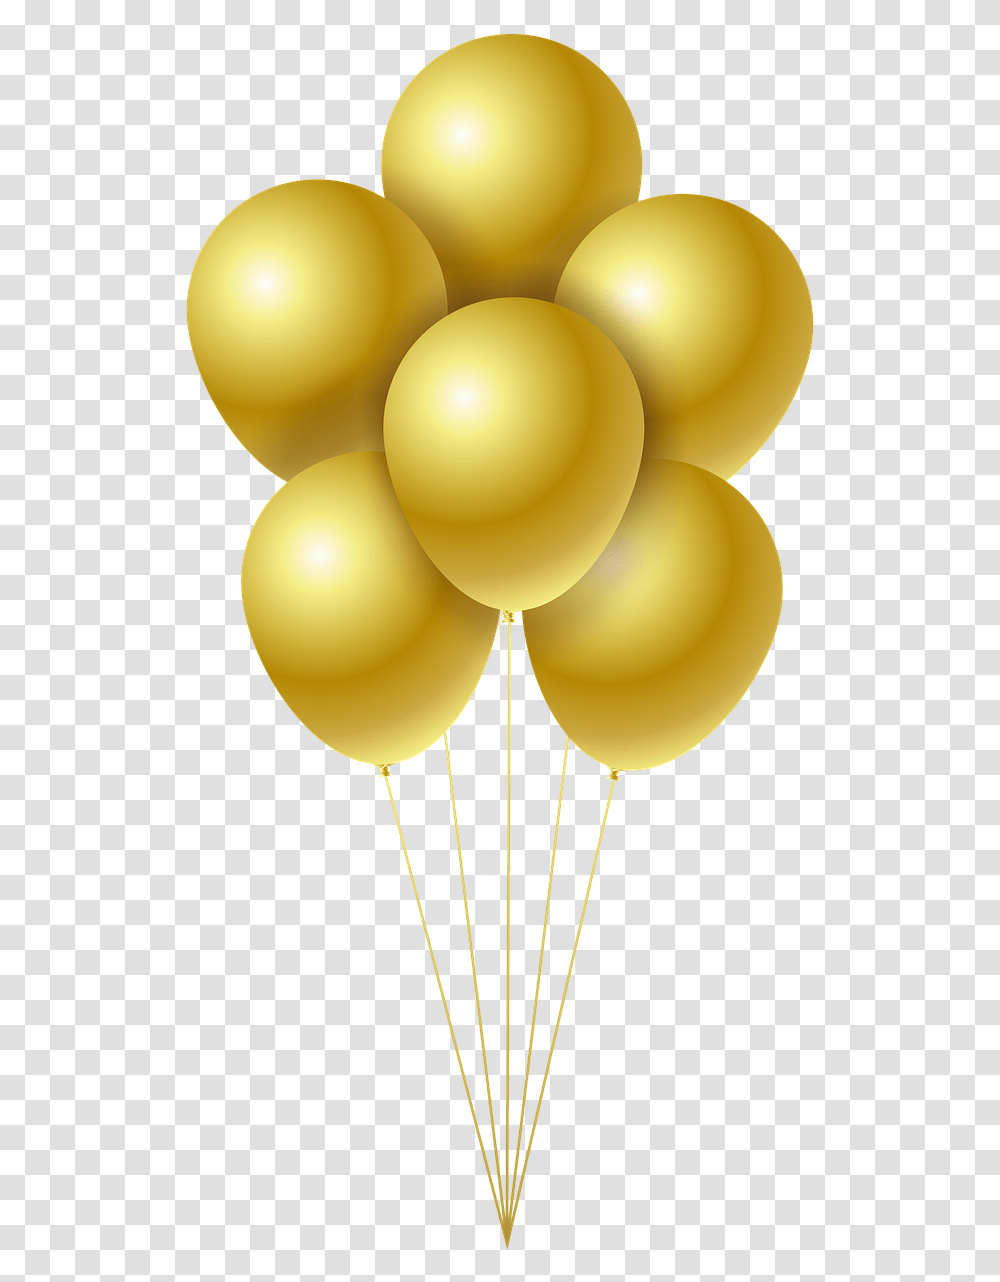 Balloons Carnival Event Gold Balloons, Lamp Transparent Png